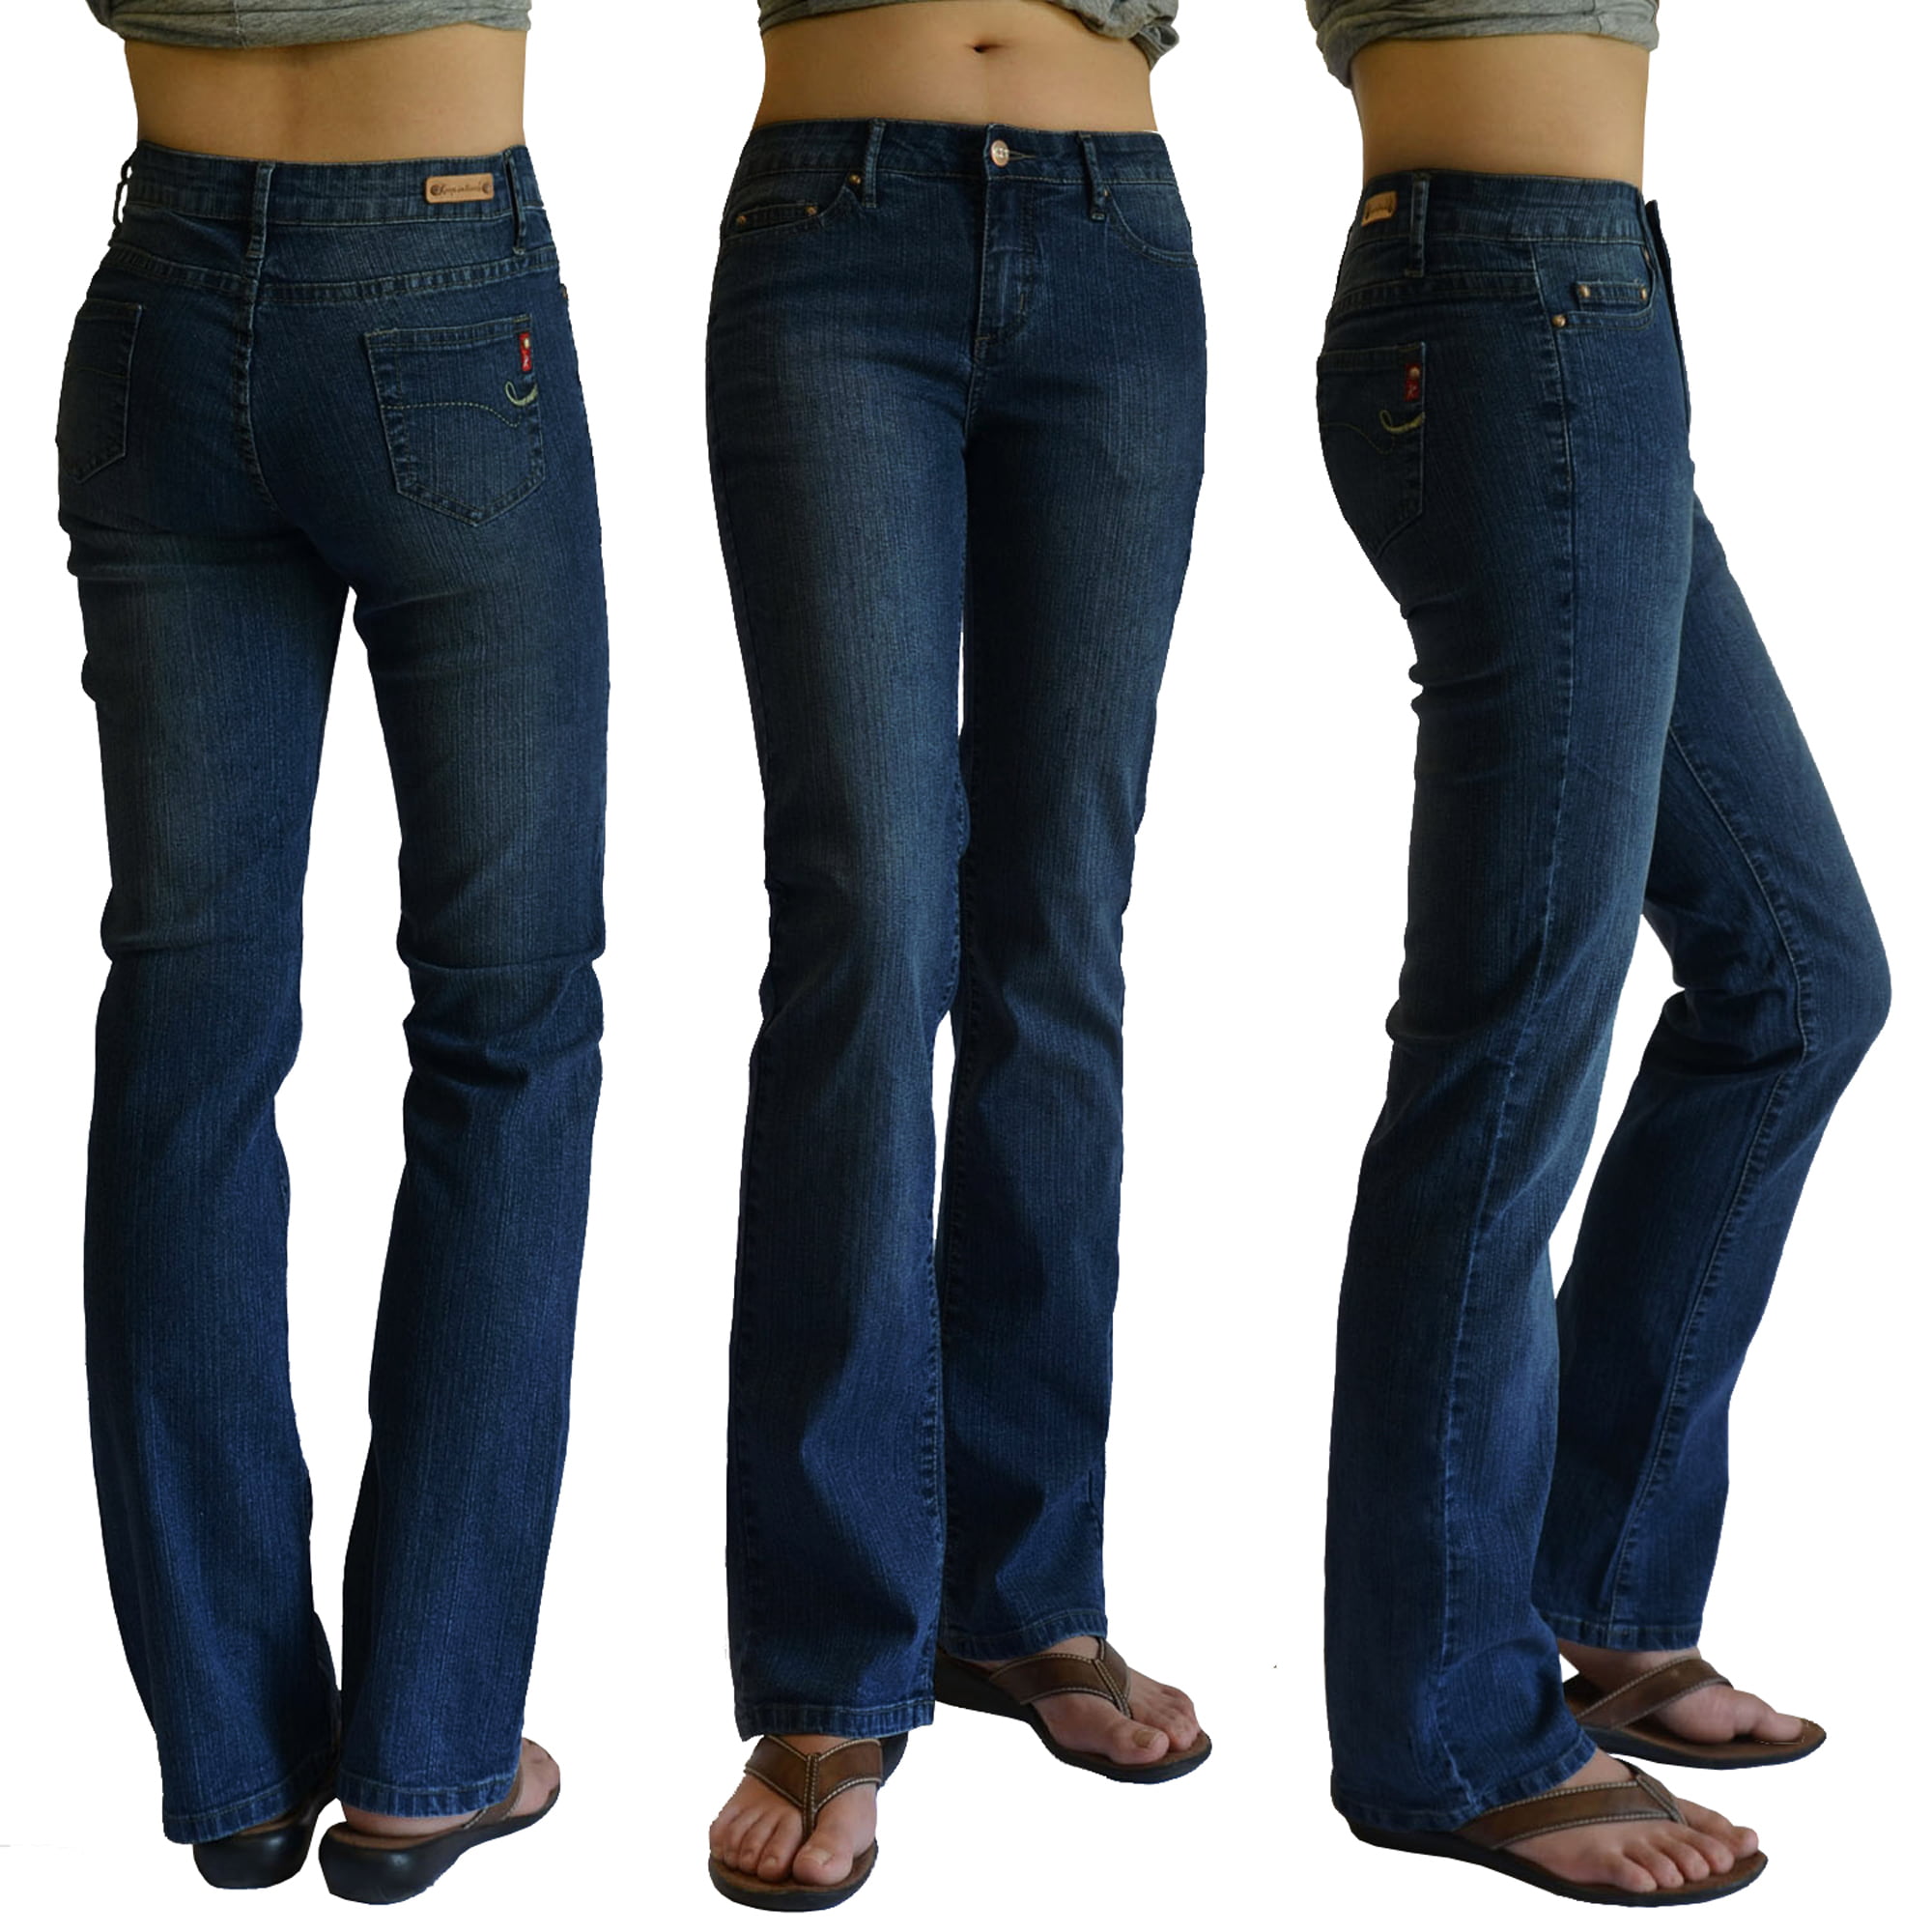 best fitting jeans for women